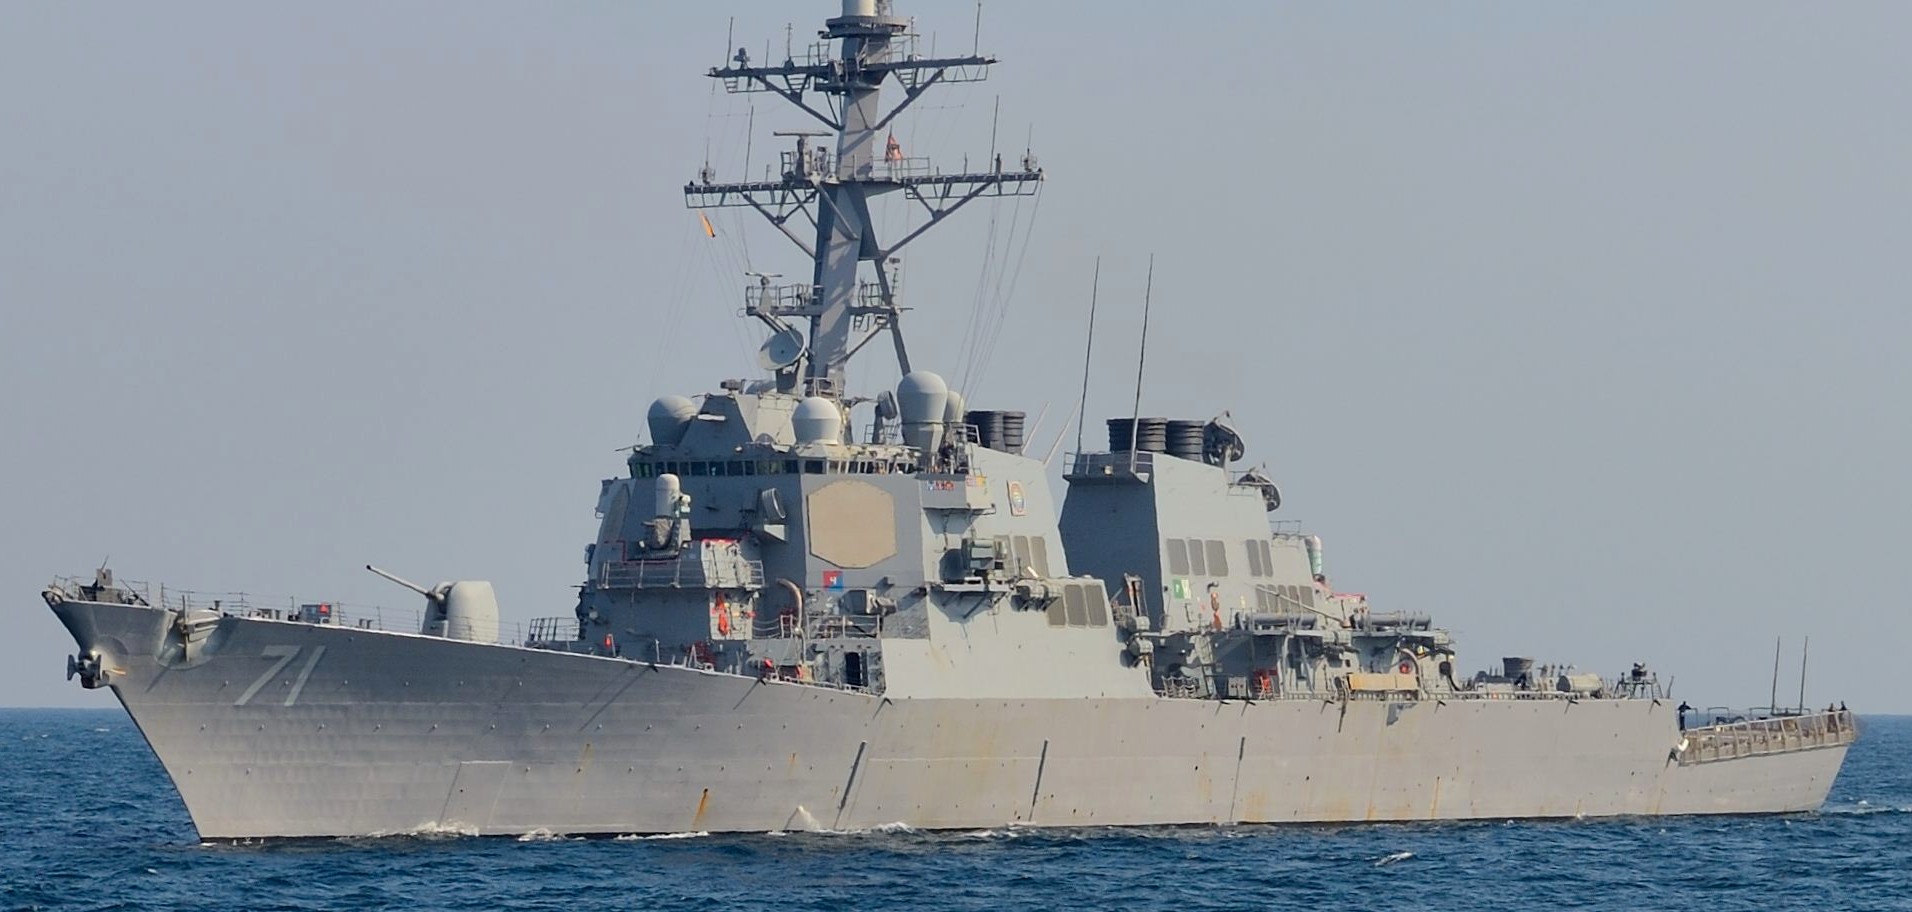 ddg-71 uss ross guided missile destroyer arleigh burke class aegis bmd 62